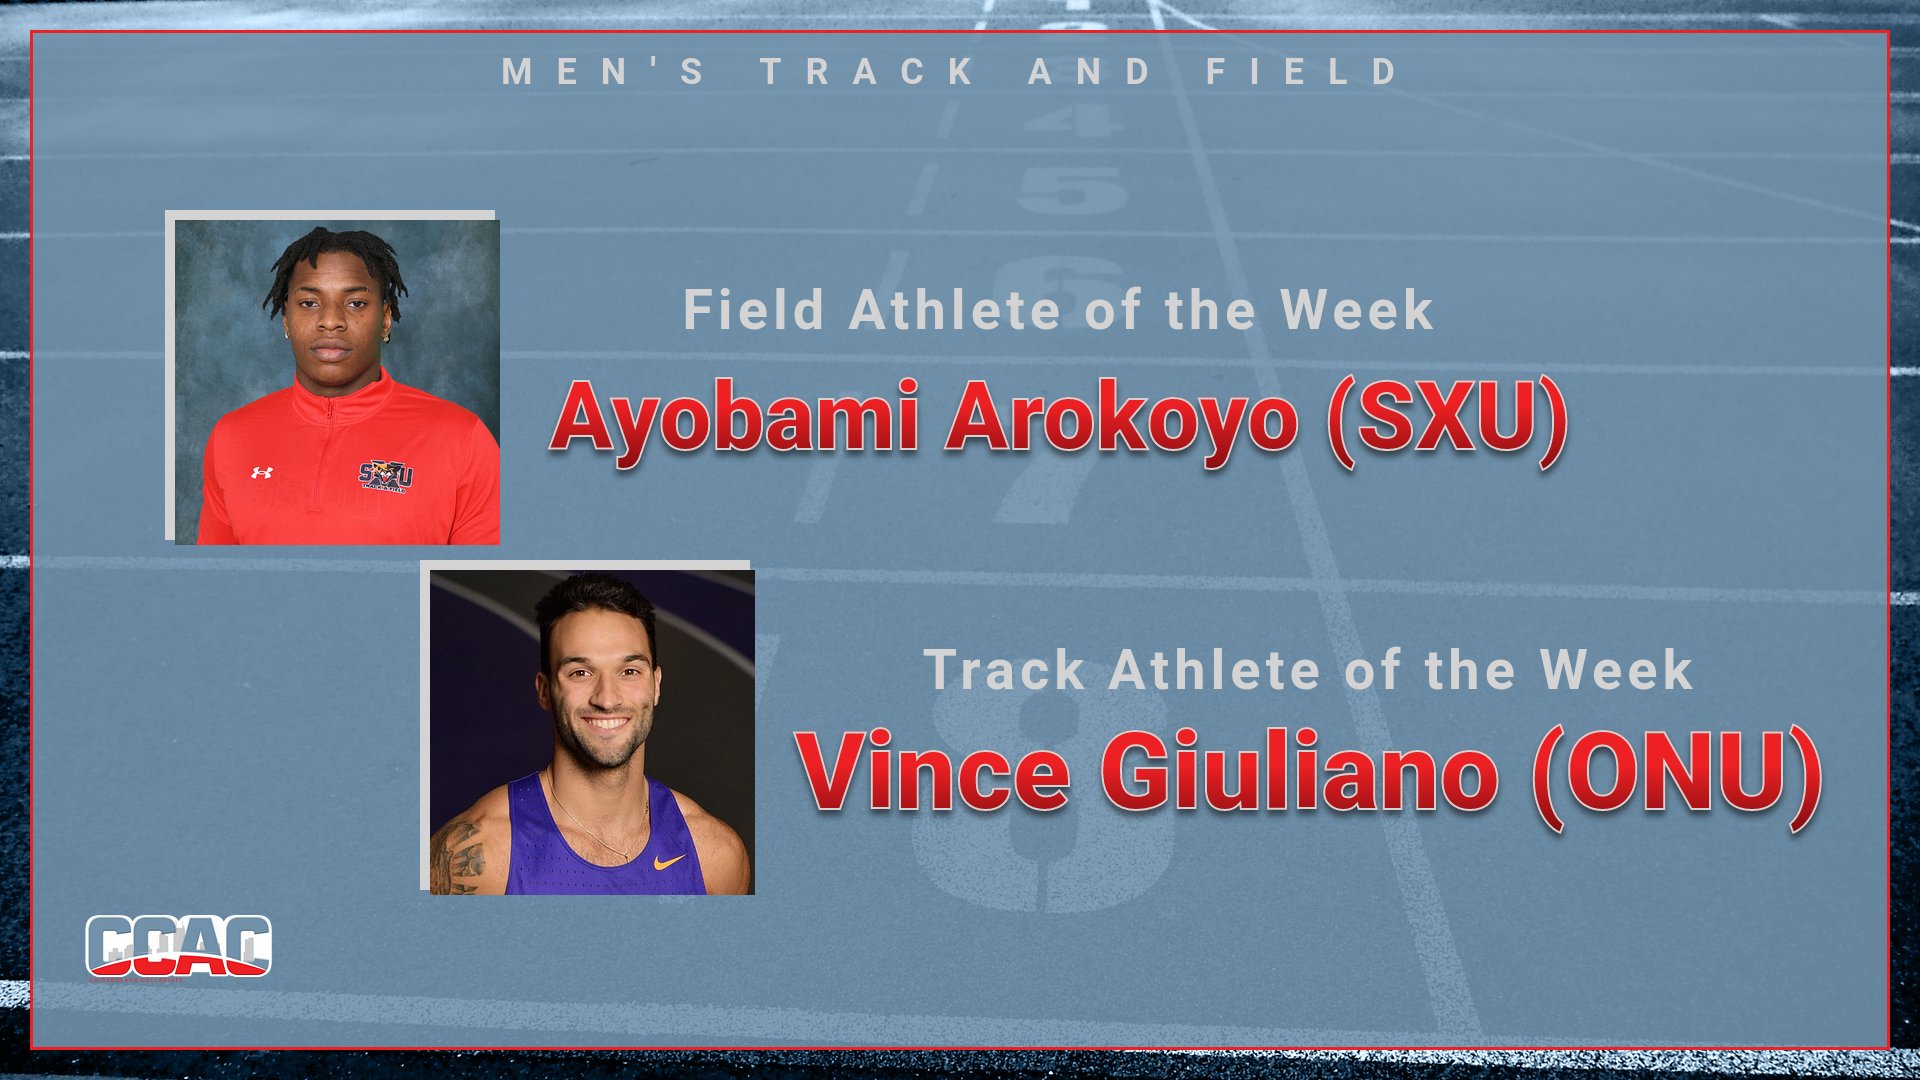 Sweep of First-Place Finishes Result In Men's T&amp;F Weekly Accolades For ONU's Giuliano, SXU's Arokoyo